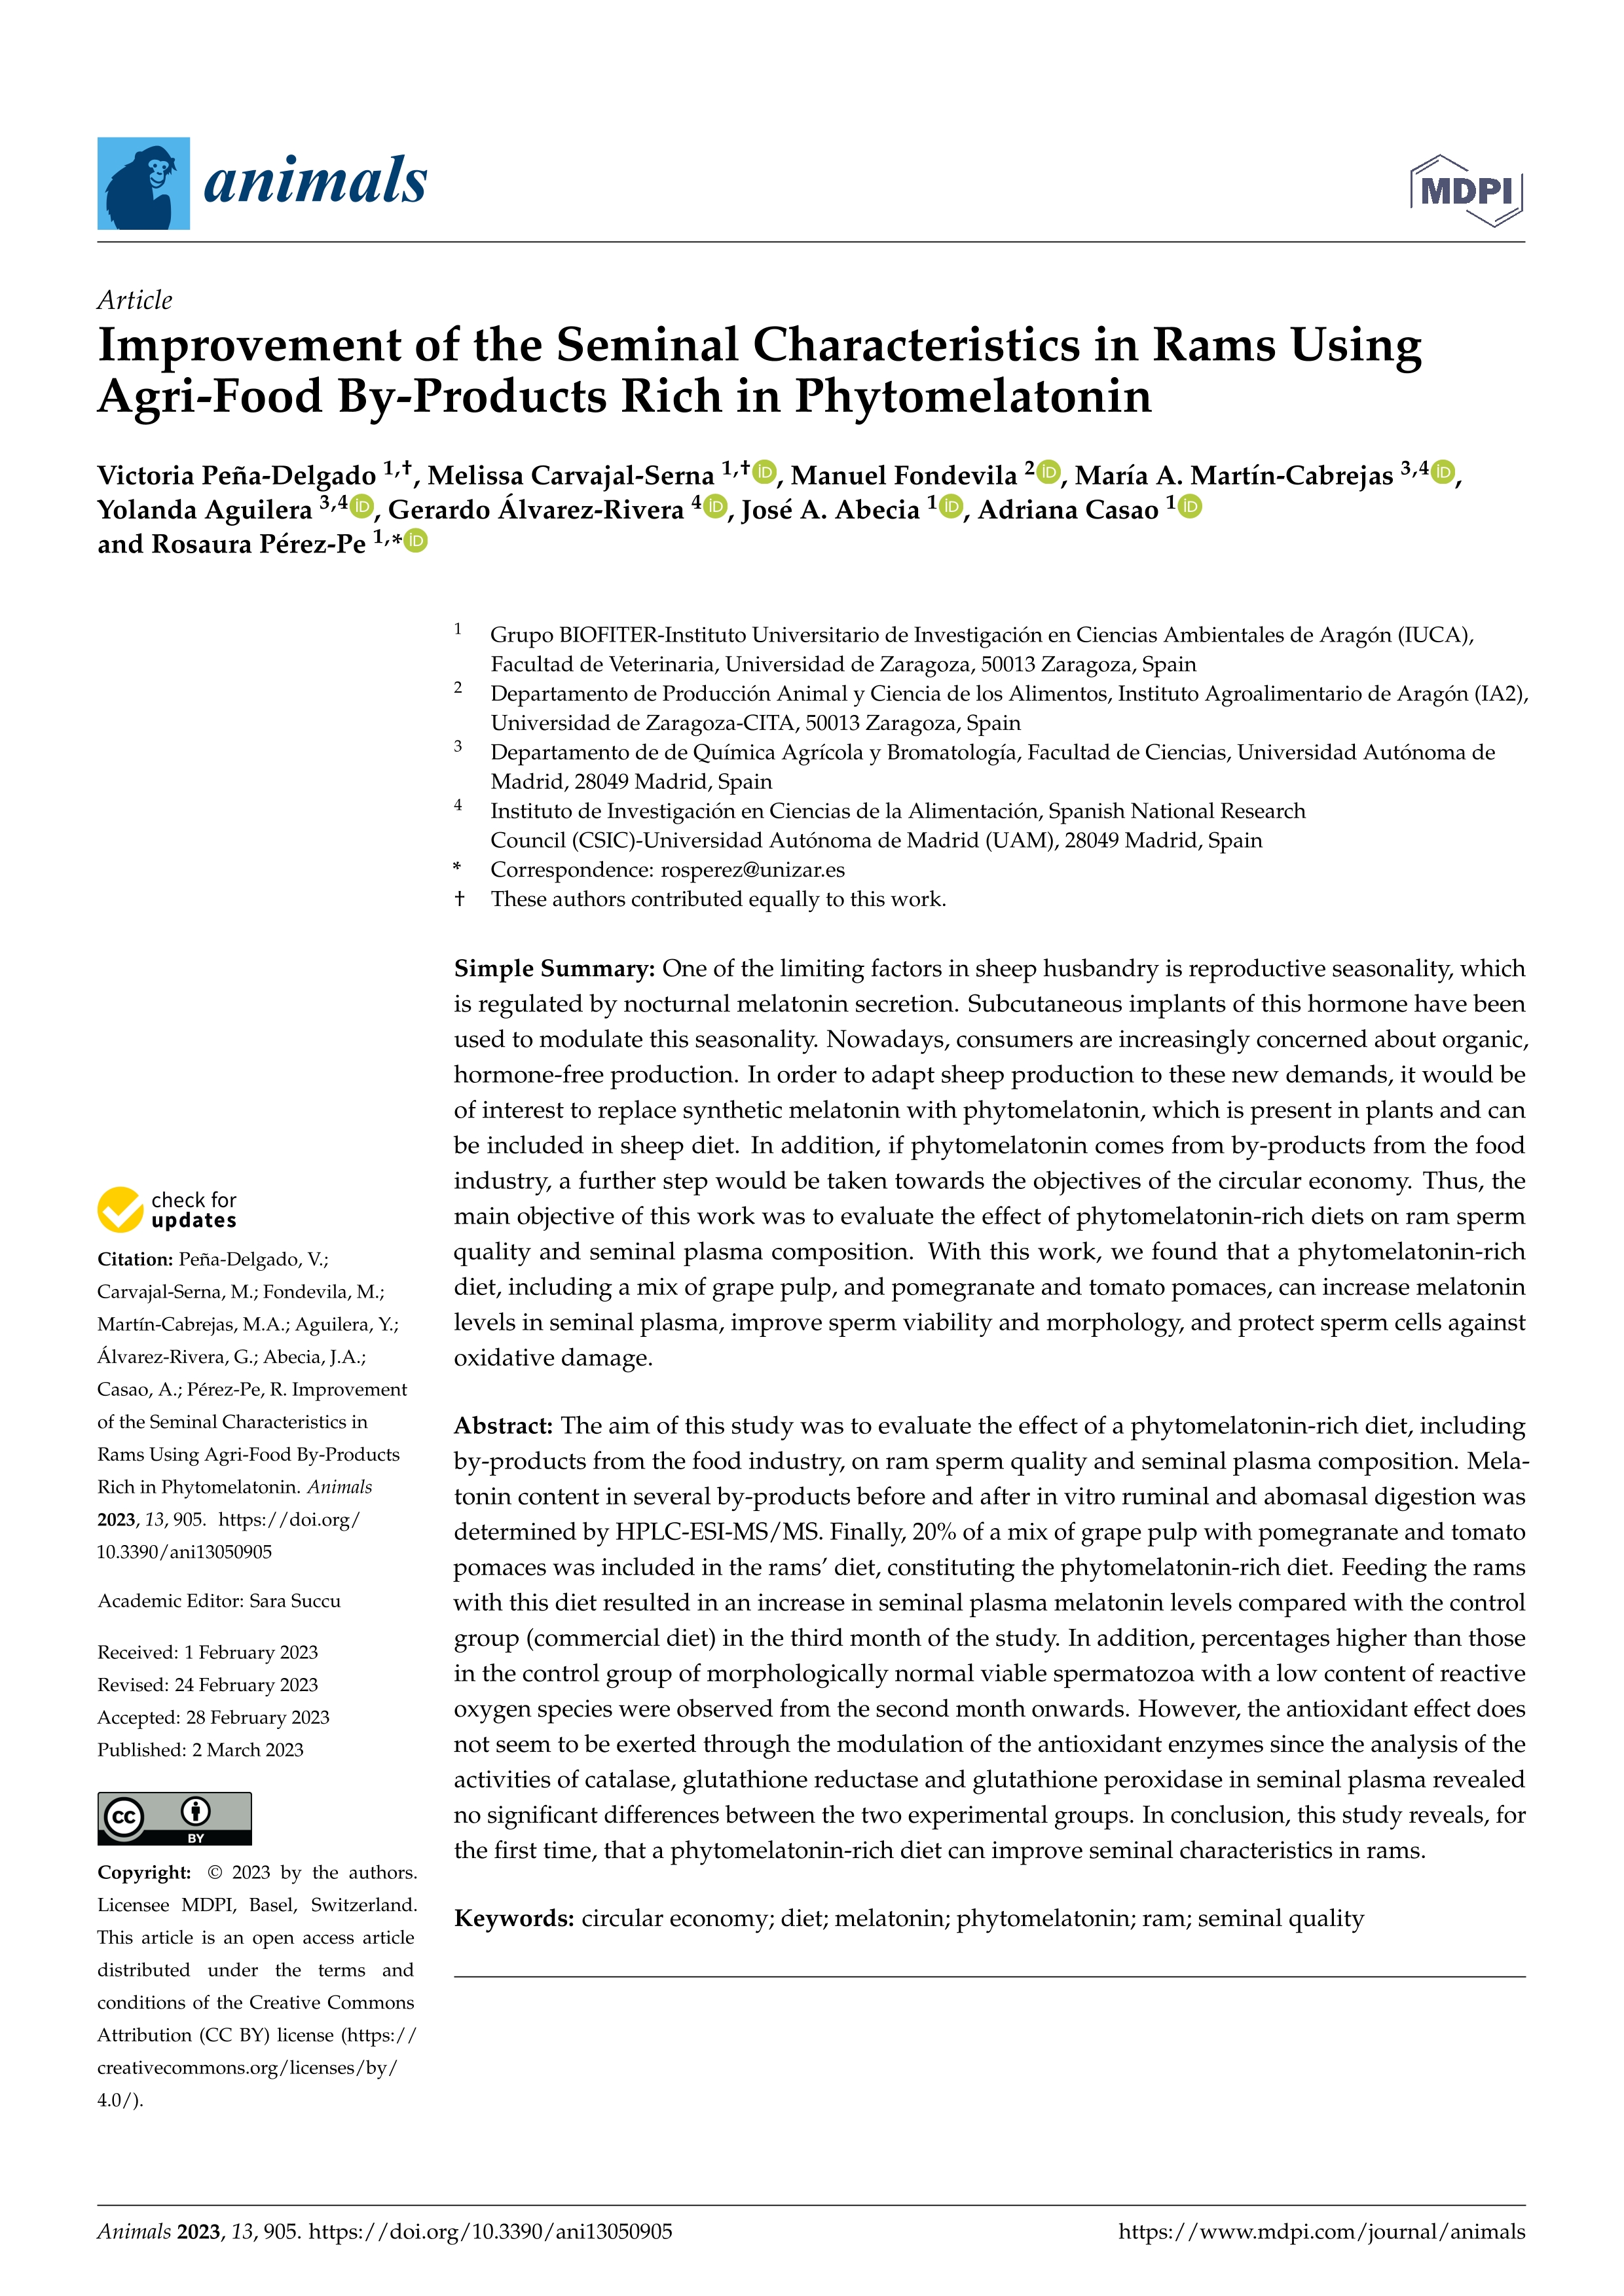 Improvement of the seminal characteristics in rams using agri-food by-products rich in phytomelatonin